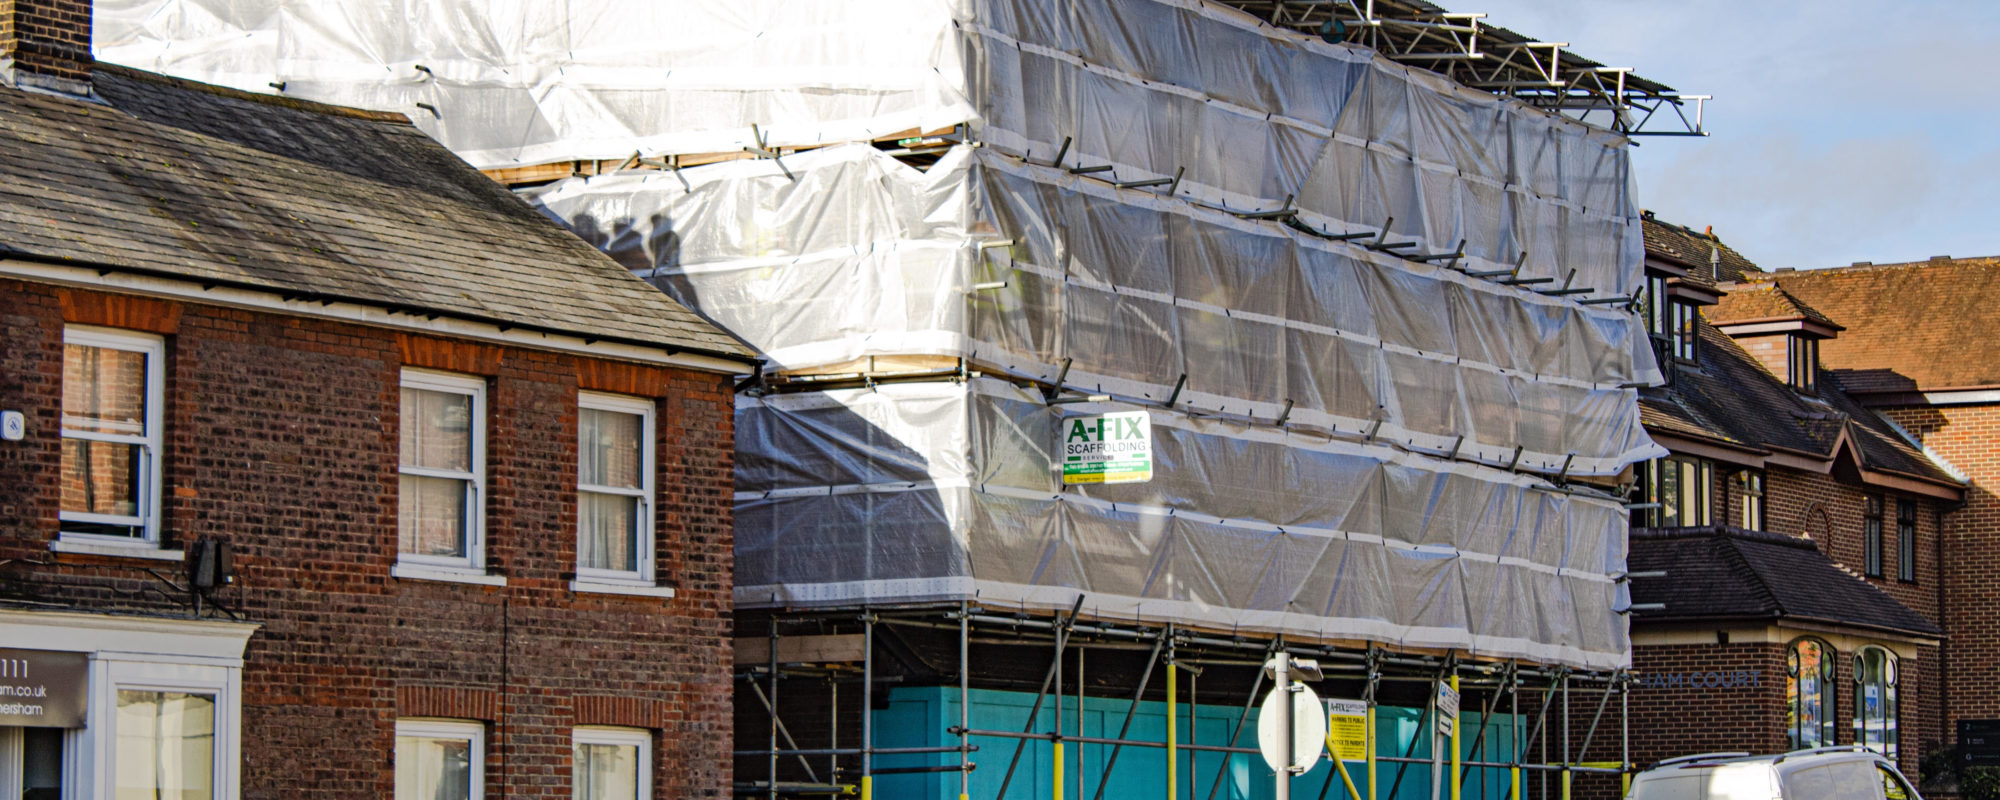 Four Reasons to Choose A-Fix Scaffolding for Your Next Job